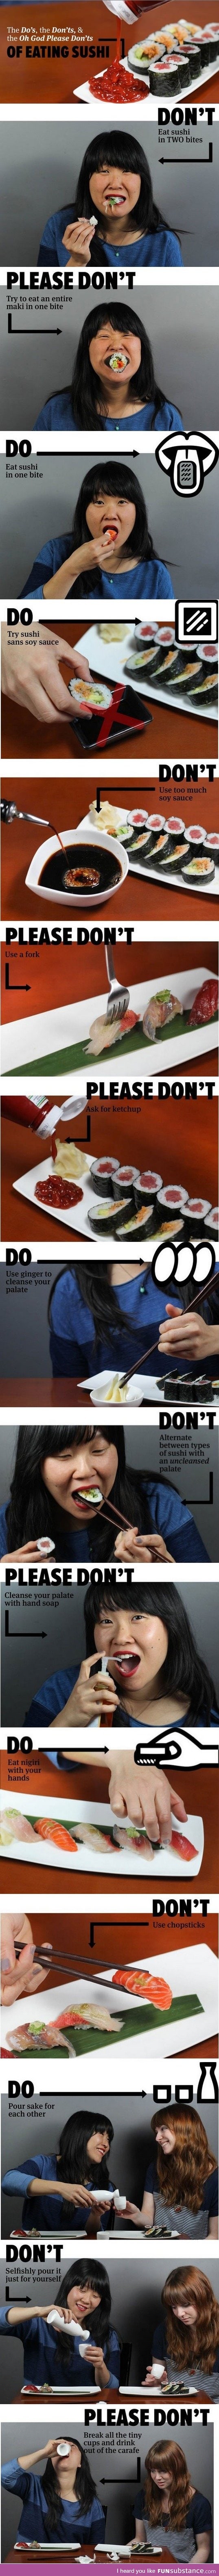 The Do’s & Don’ts of eating sushi...